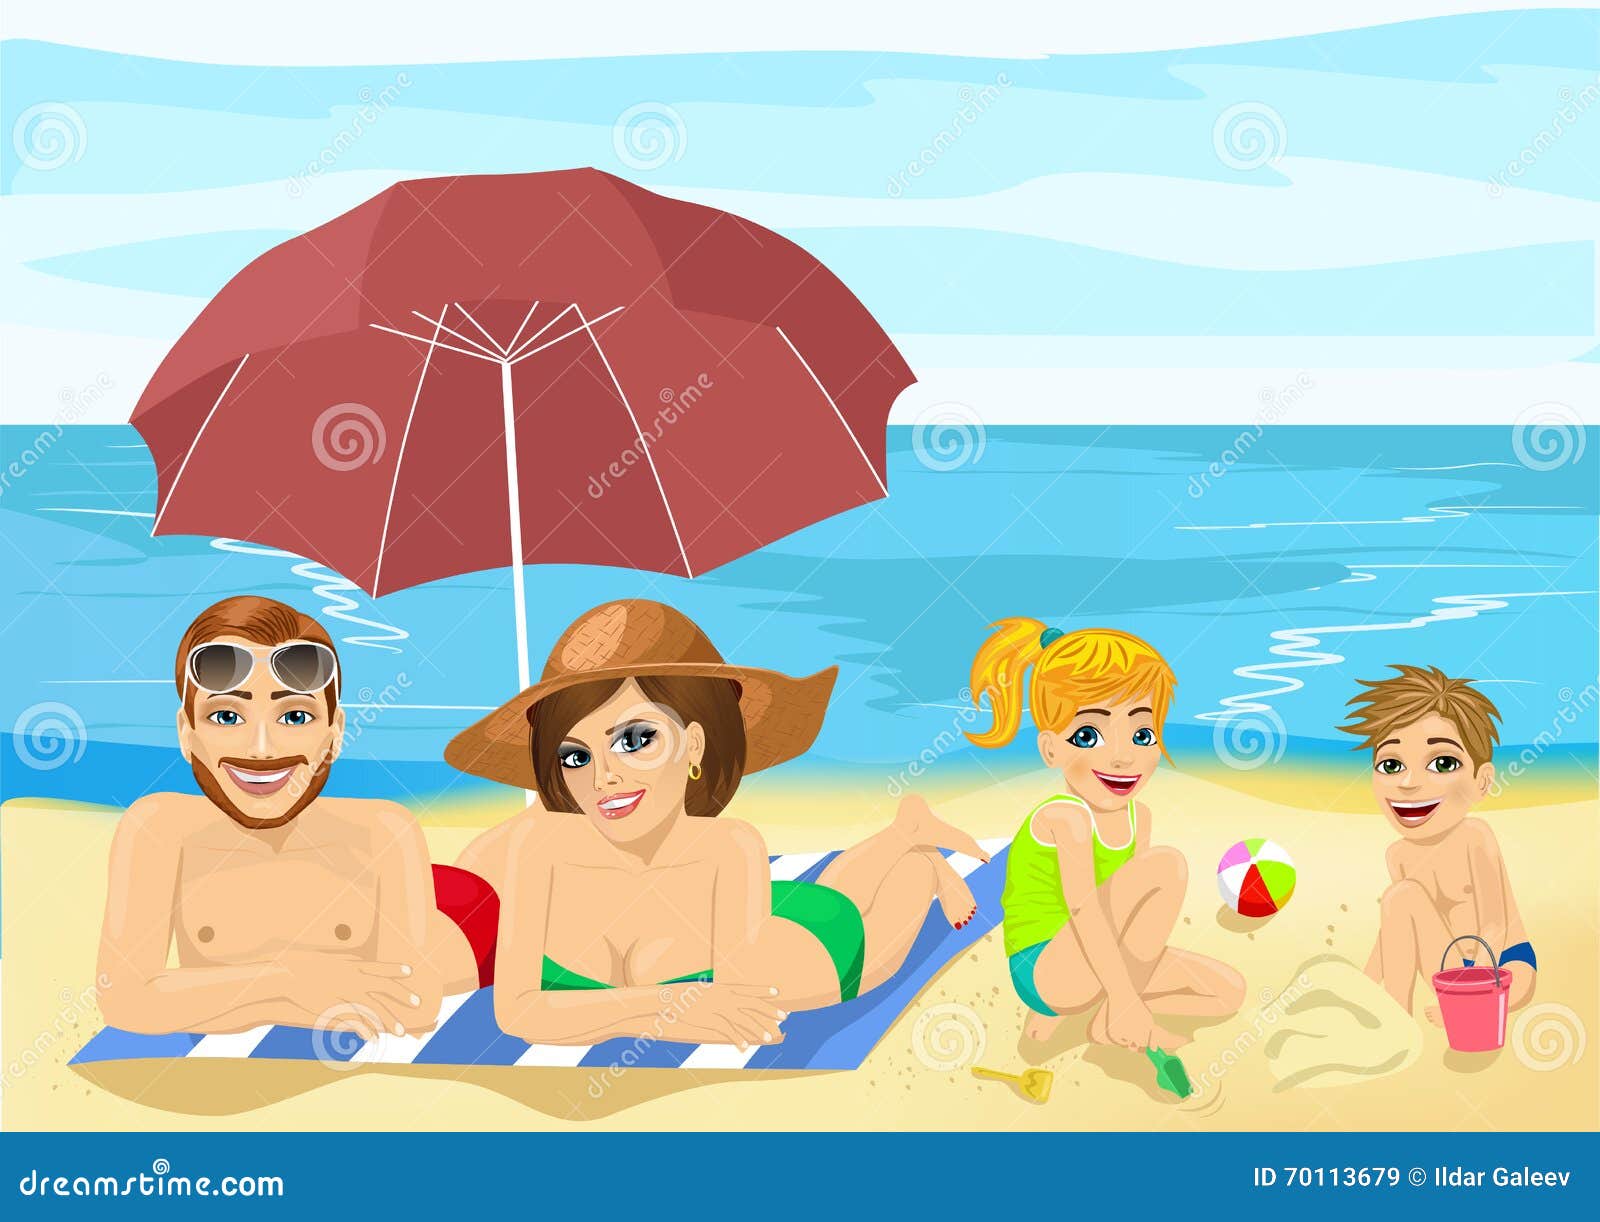 clipart family at the beach - photo #41